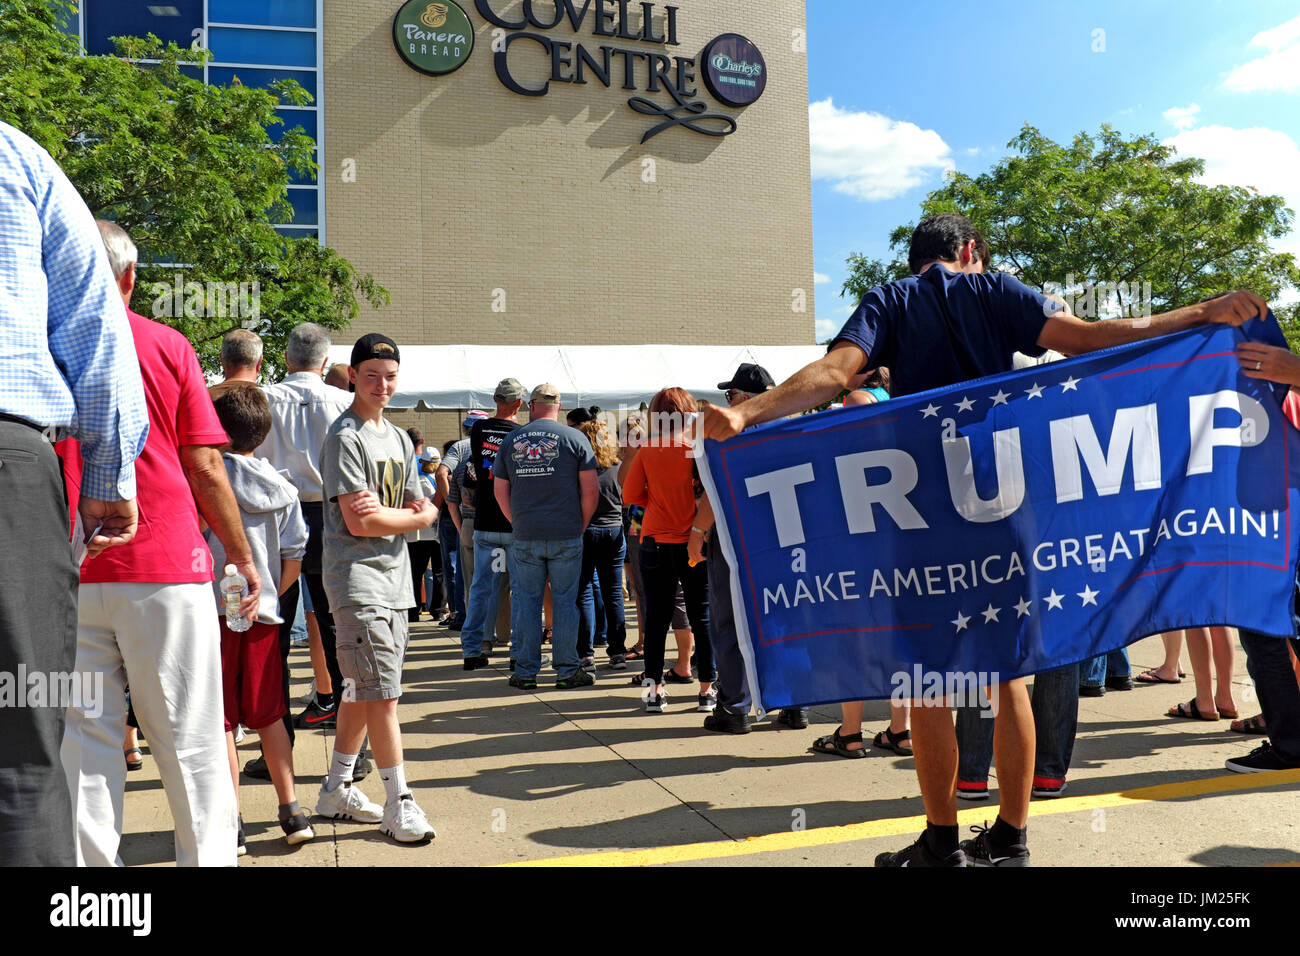 Youngstown, Ohio, USA. 25th July, 2017. President Trump supporters line up outside the Covelli Centre in Youngstown, Ohio, USA on July 25, 2017 for a rally Credit: Mark Kanning/Alamy Live News Stock Photo